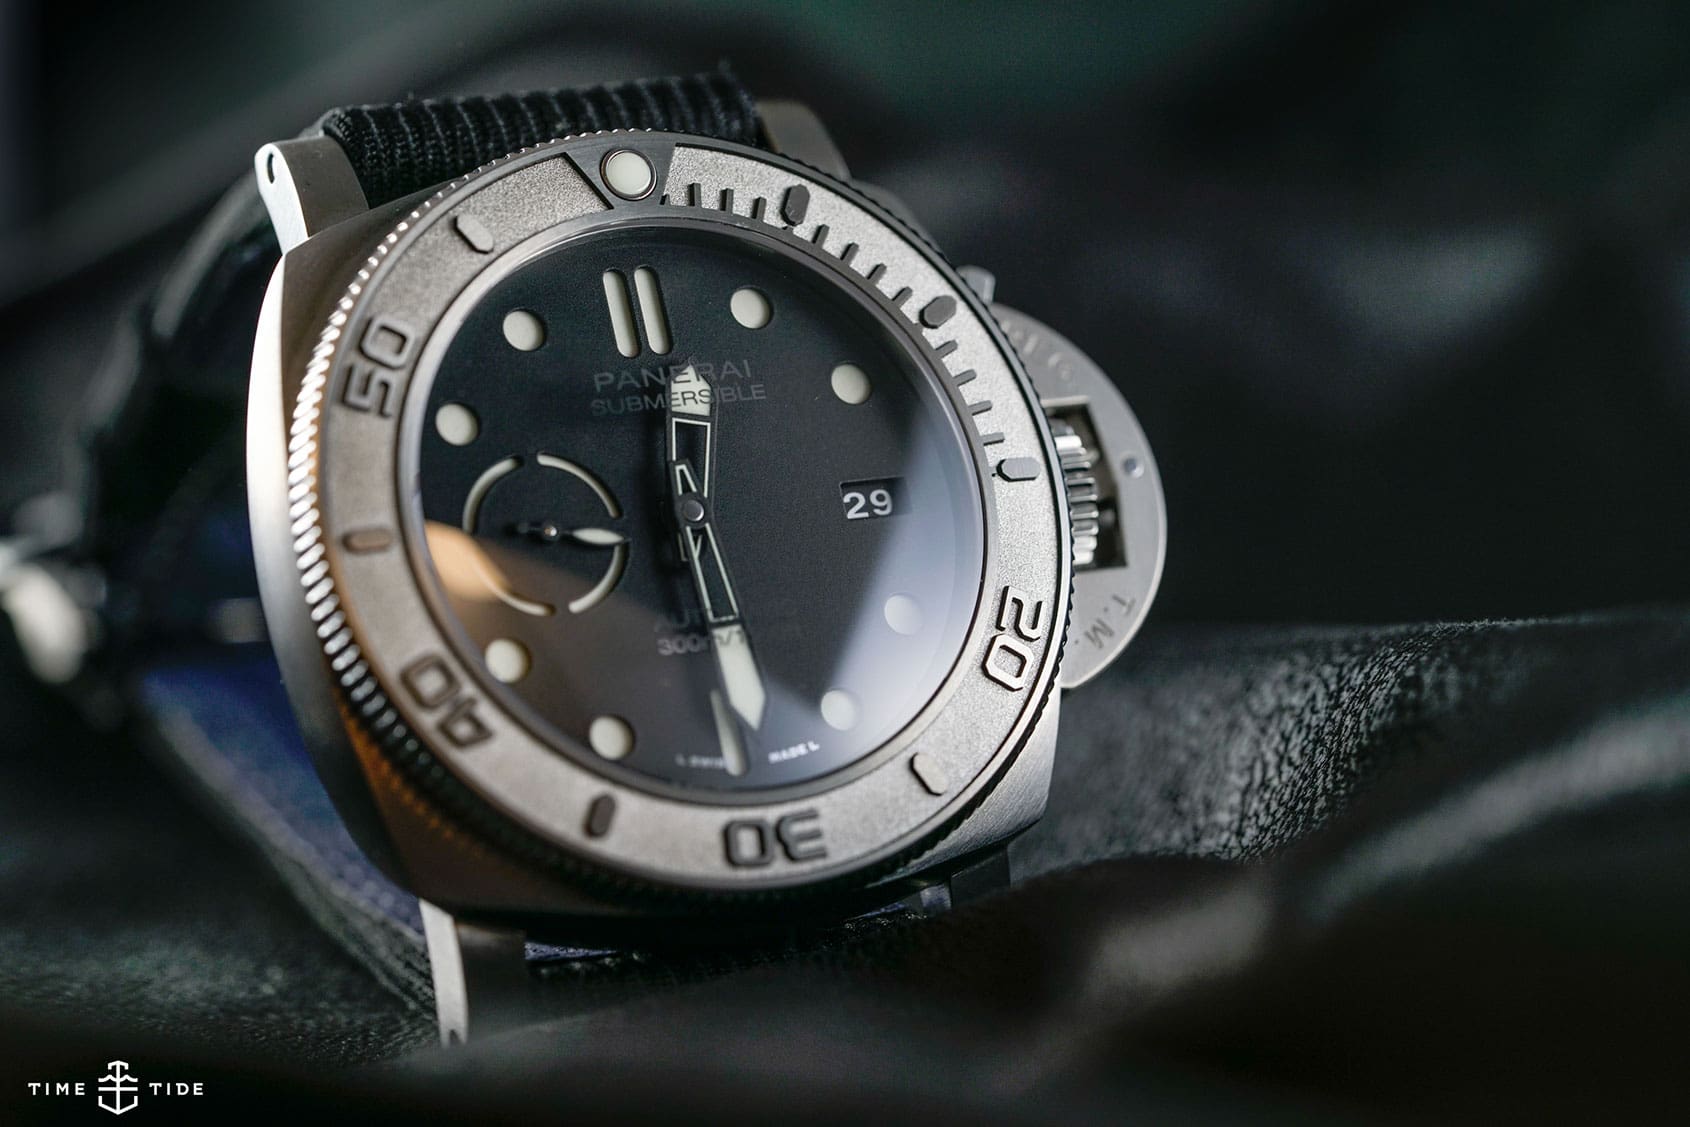 HANDS-ON: The sustainable Submersible, Panerai’s Submersible Mike Horn Edition, PAM00984